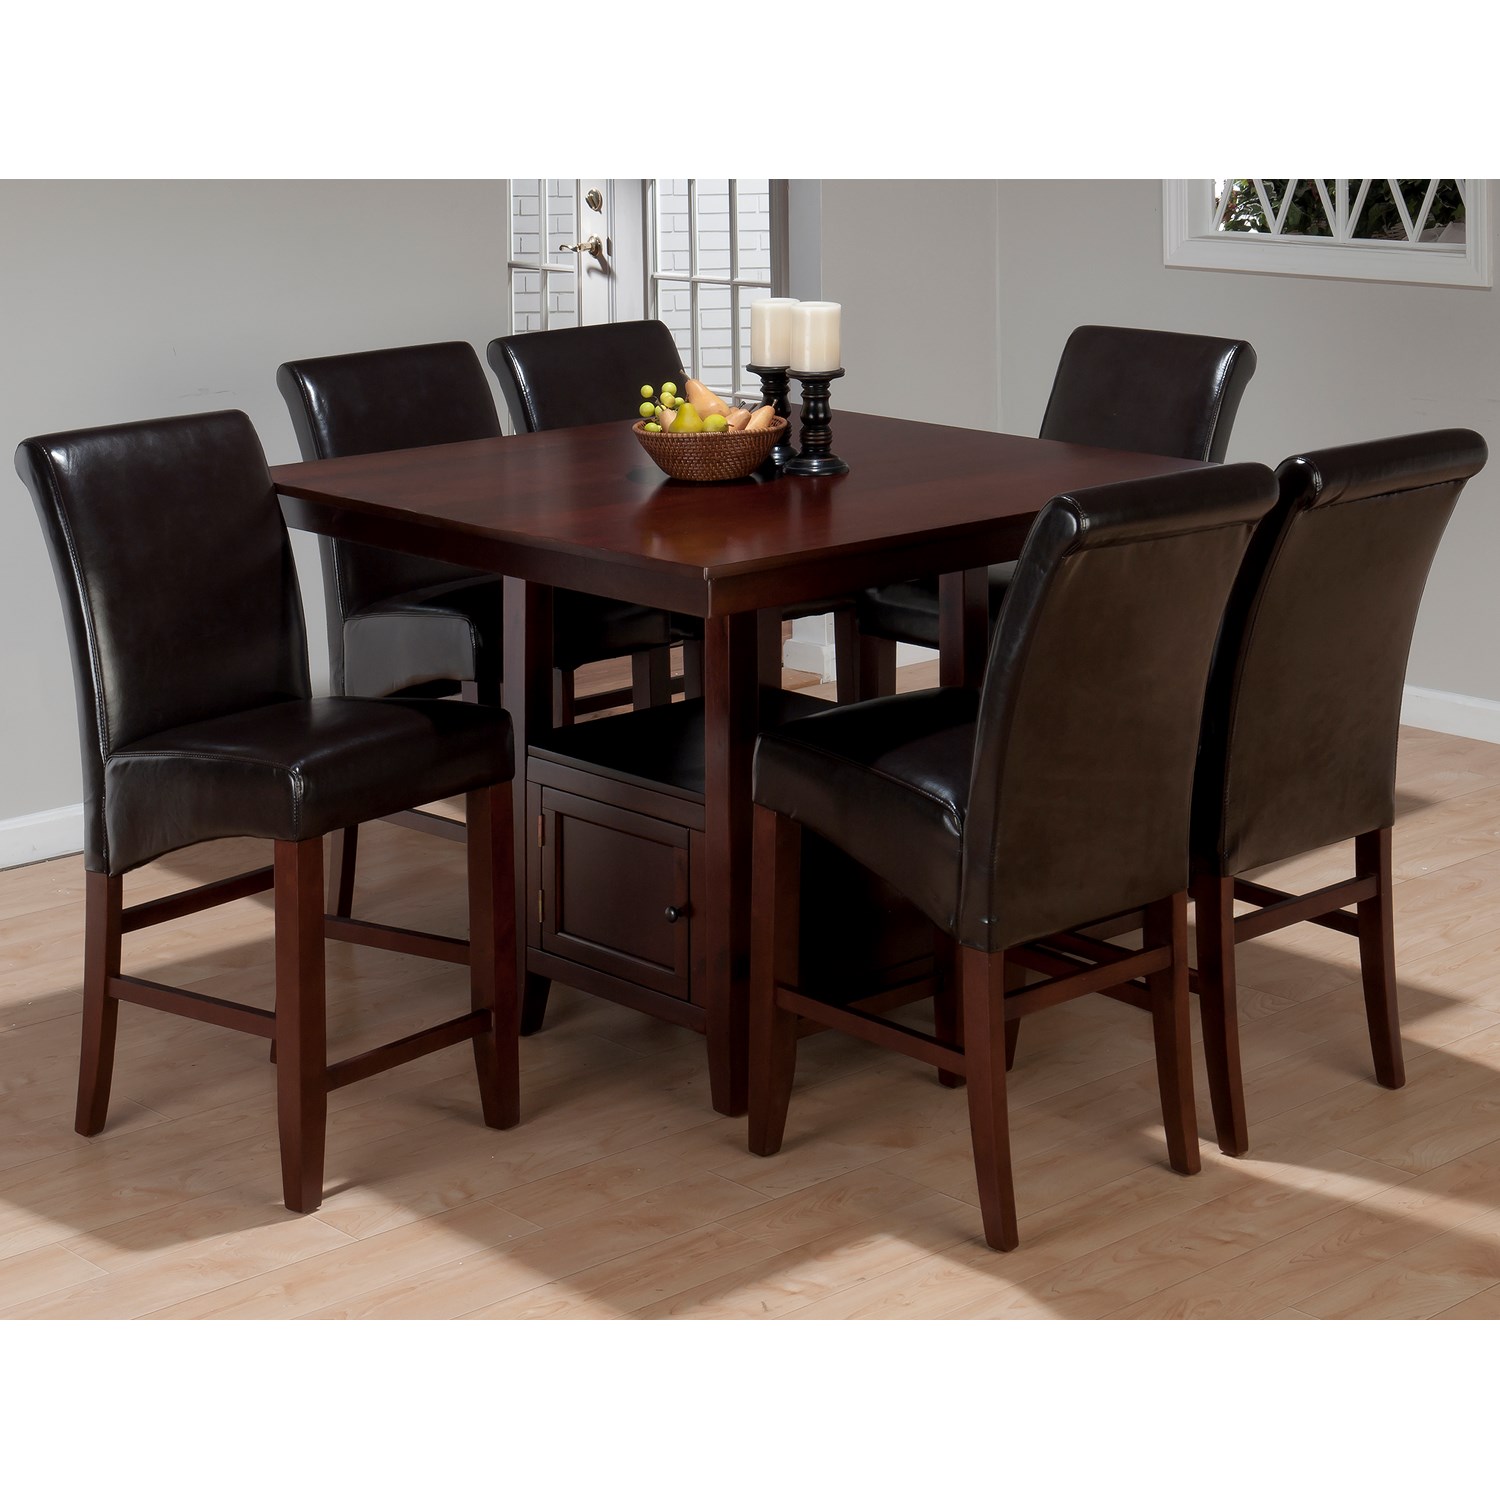 square dining table counter height photo - 3